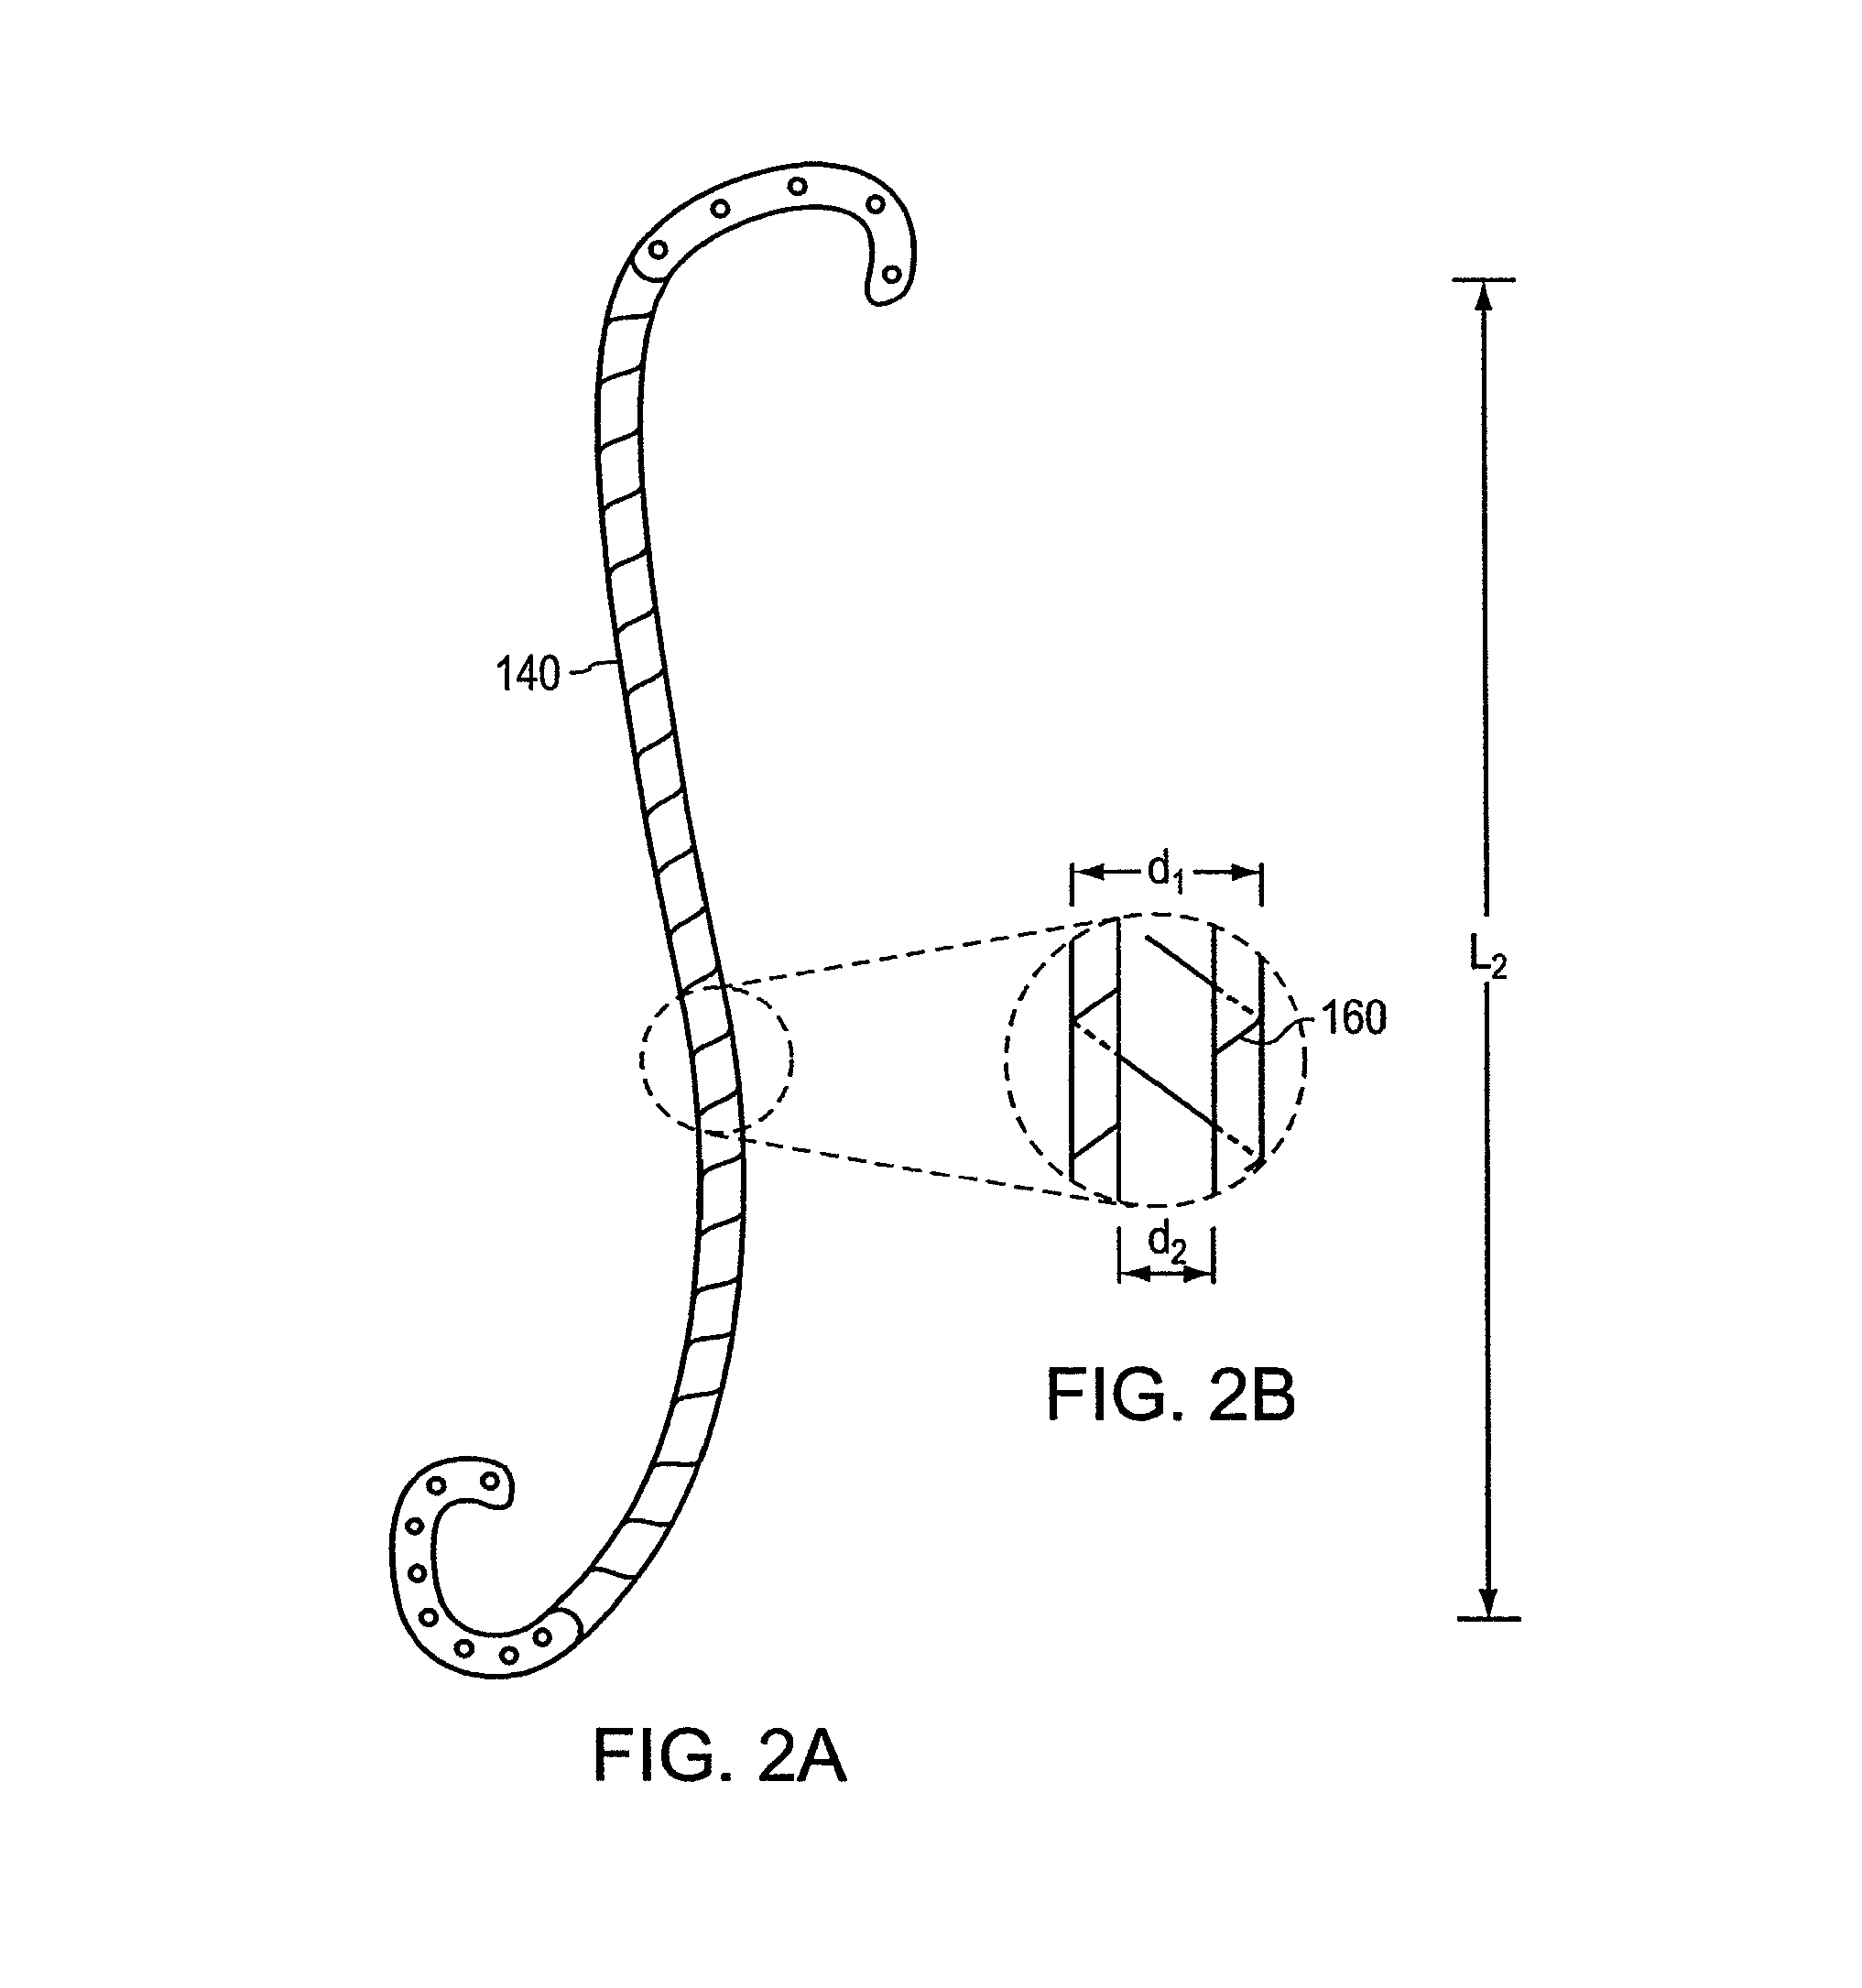 Method of disposing a linearly expandable ureteral stent within a patient